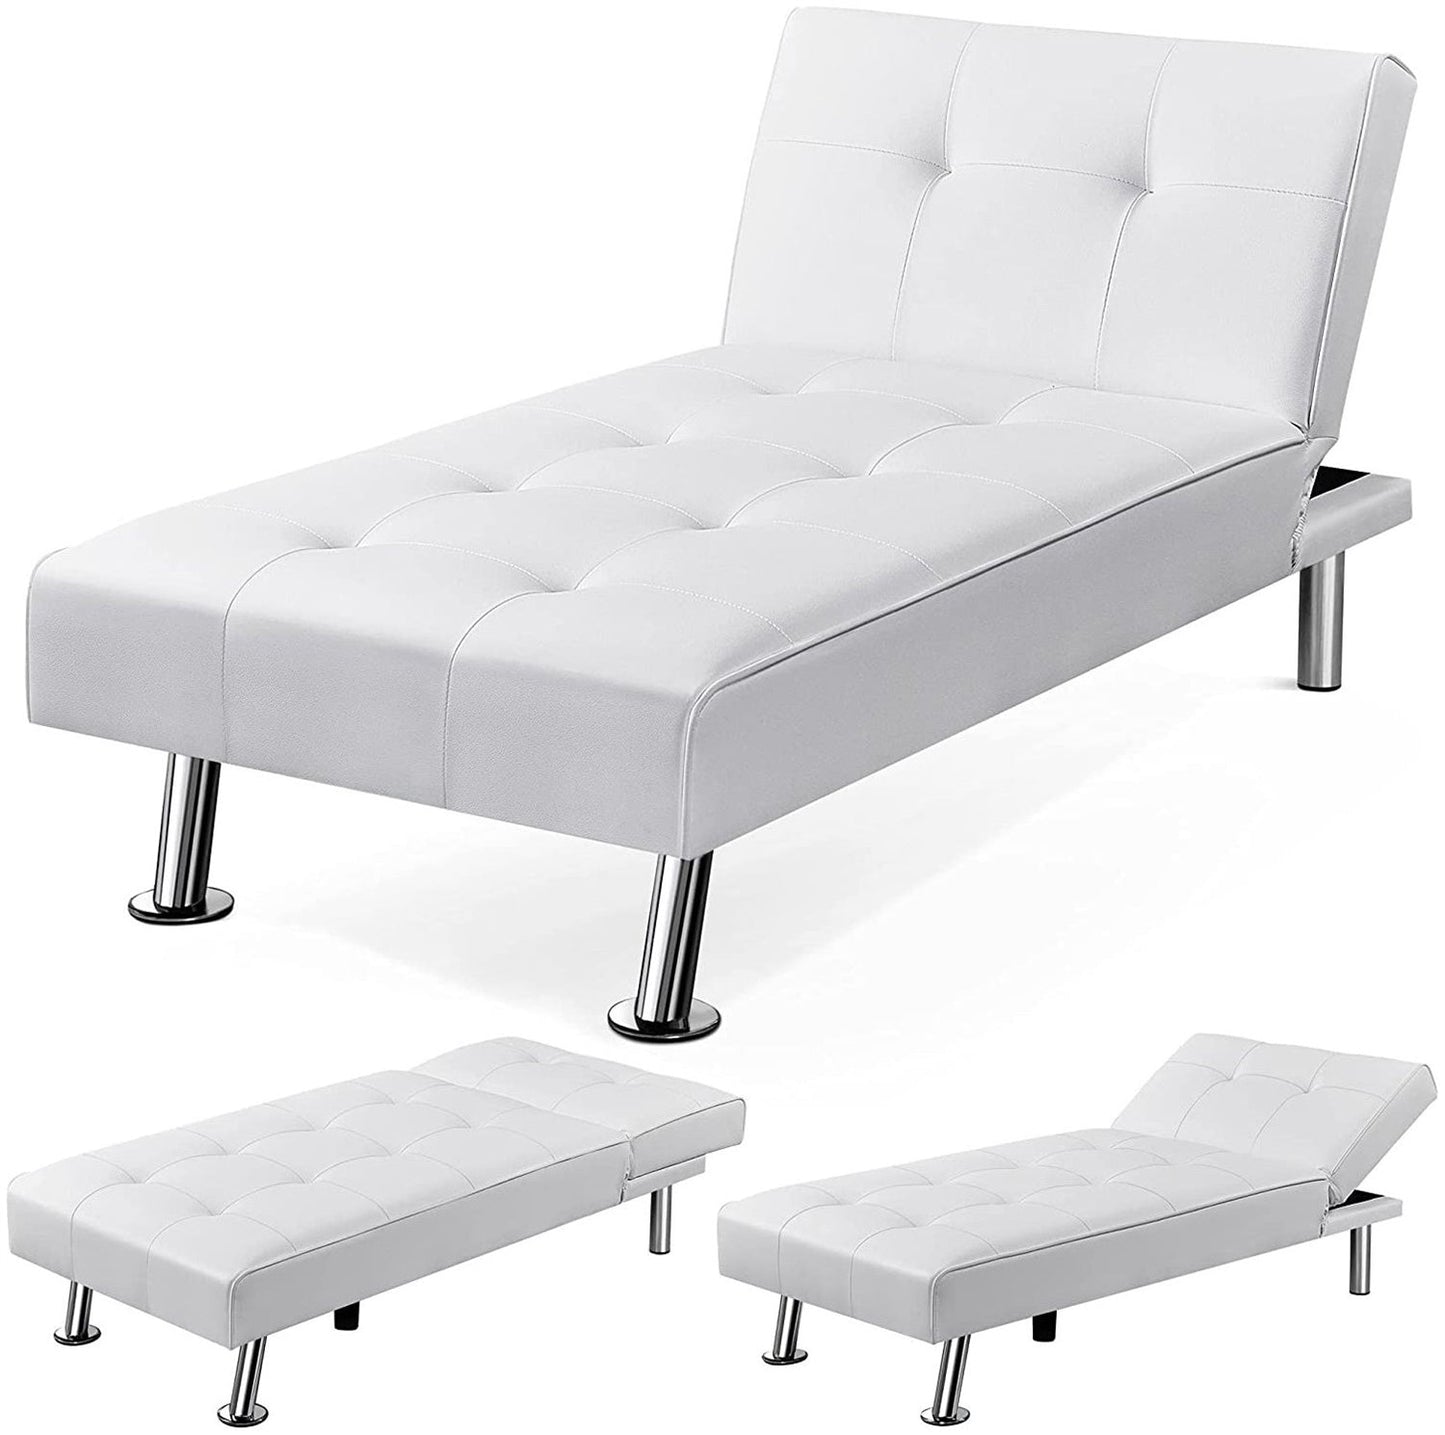 Living Room > Recliners And Chaise Lounge - White Modern Faux Leather Chaise Lounge Recliner Sleeper Sofa